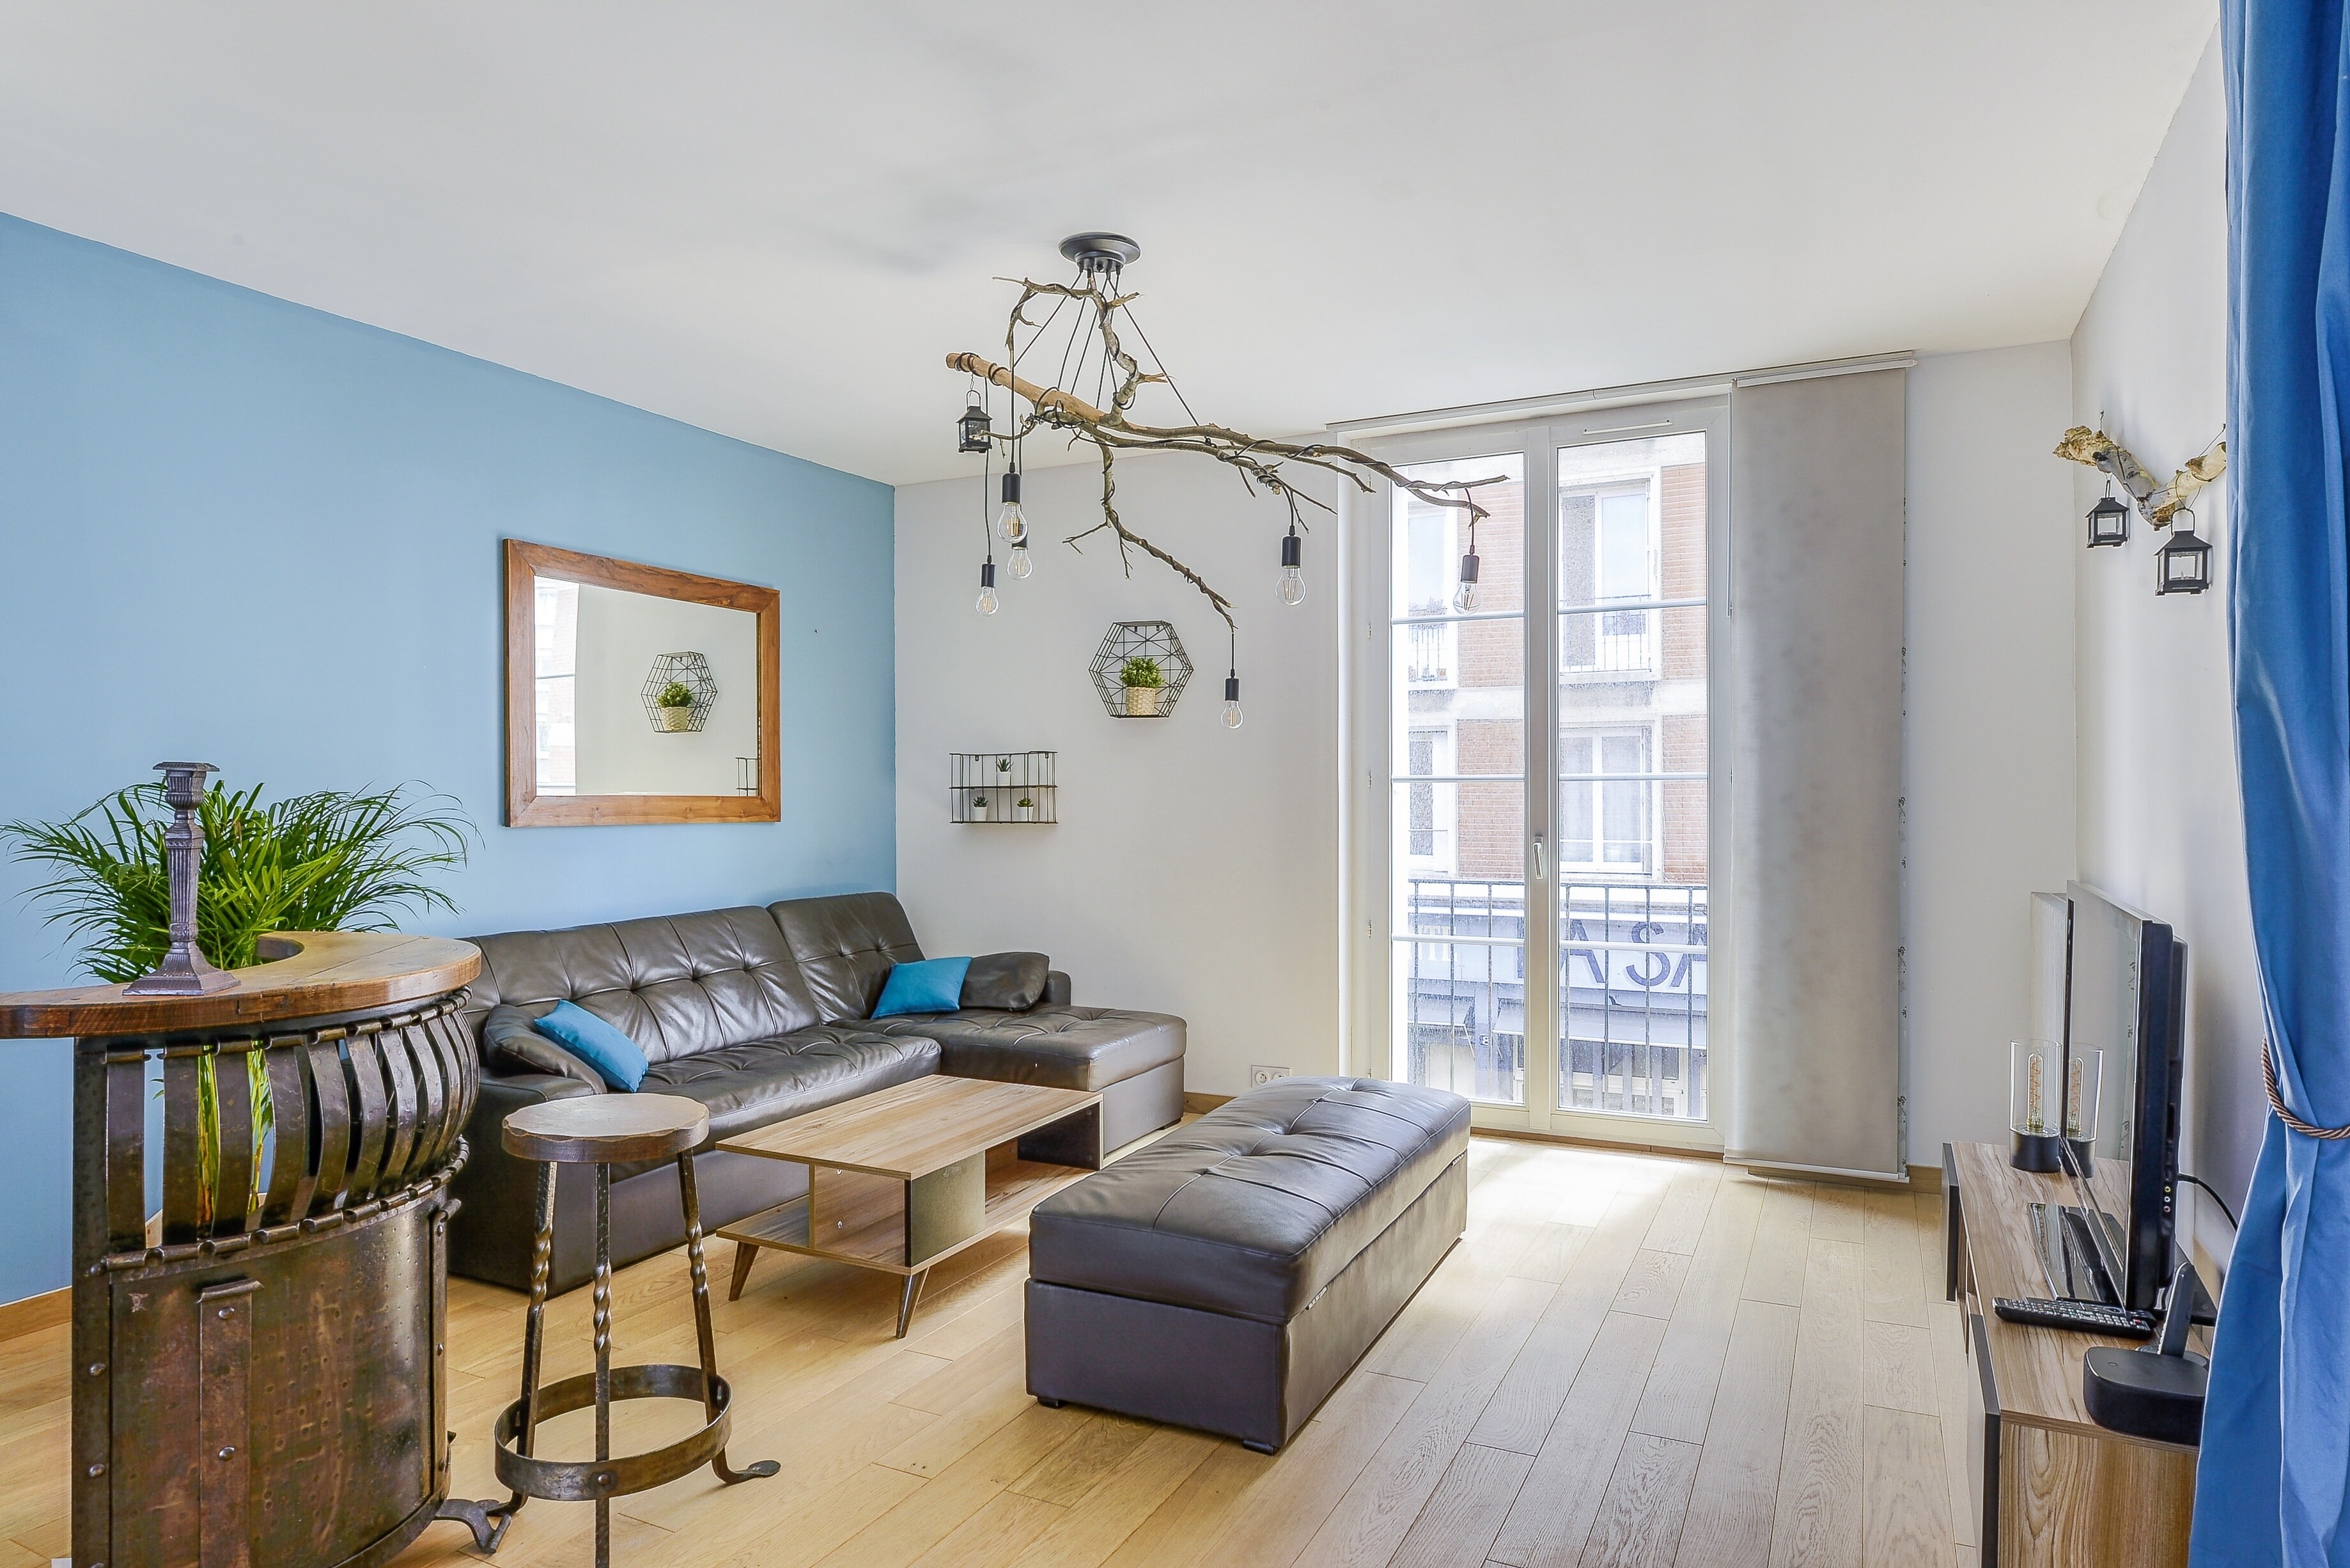 Property Image 1 - Renovated one bedroom flat in Saint-François district in Le Havre